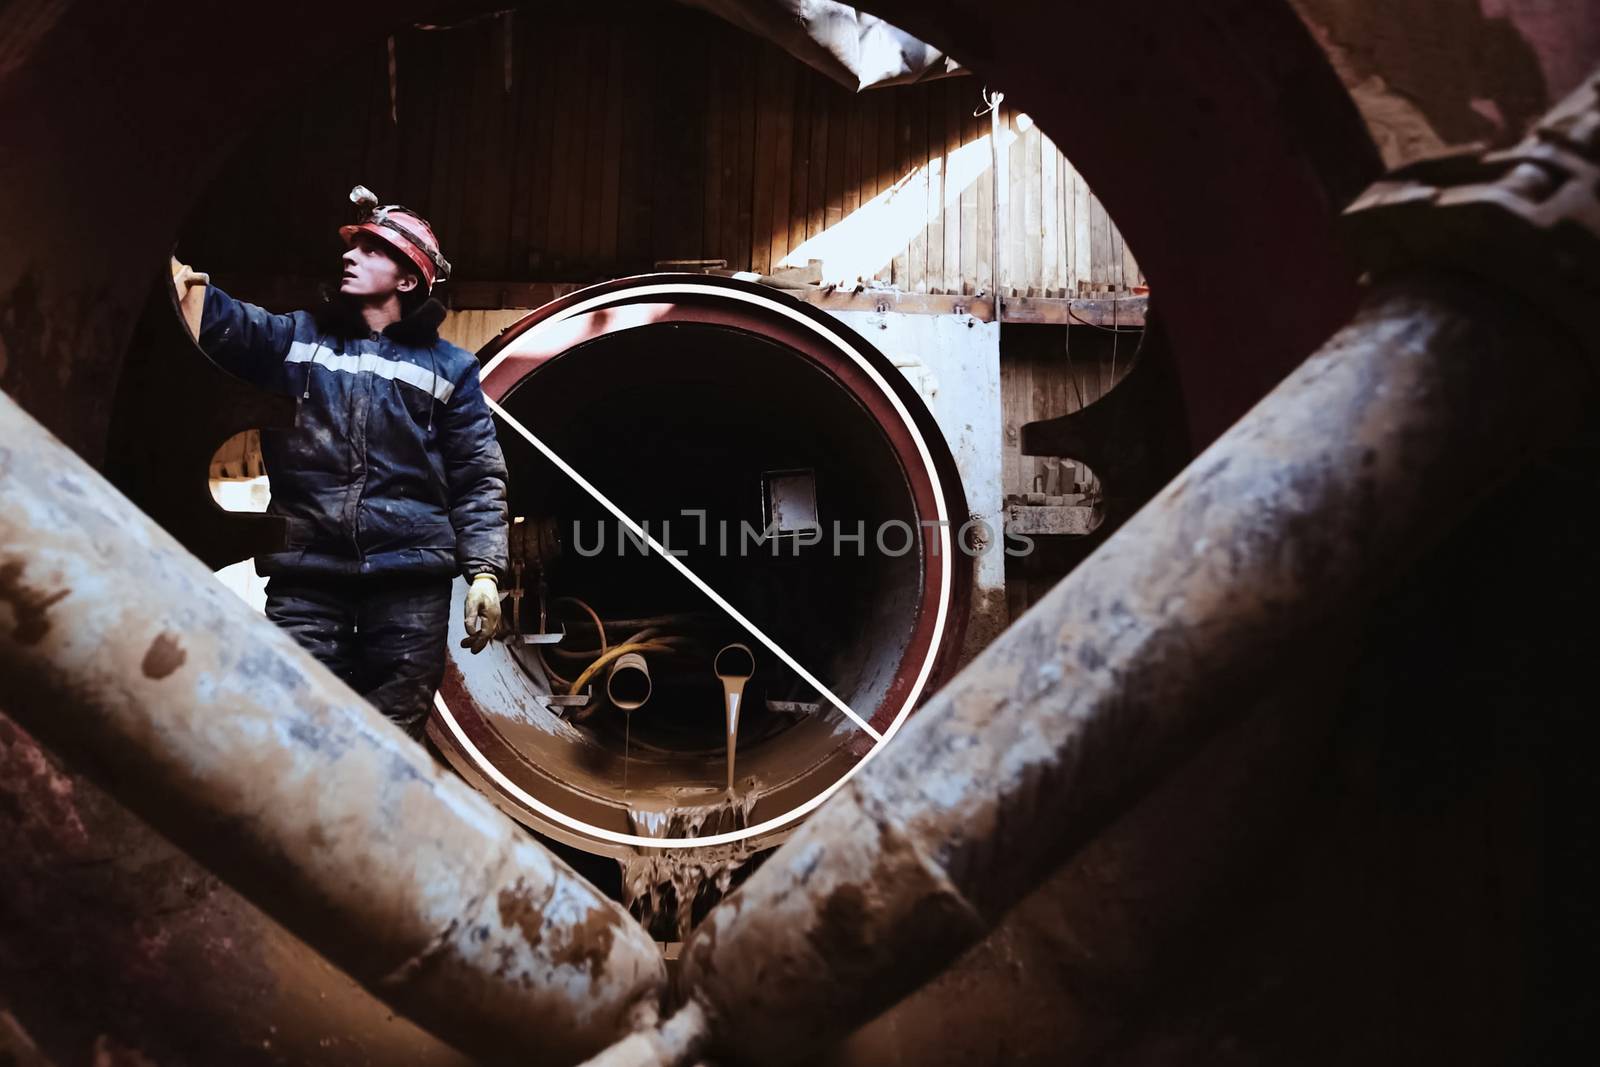 Irkutsk, Russia - March 24, 2017: The worker stands near the pipeline under construction.